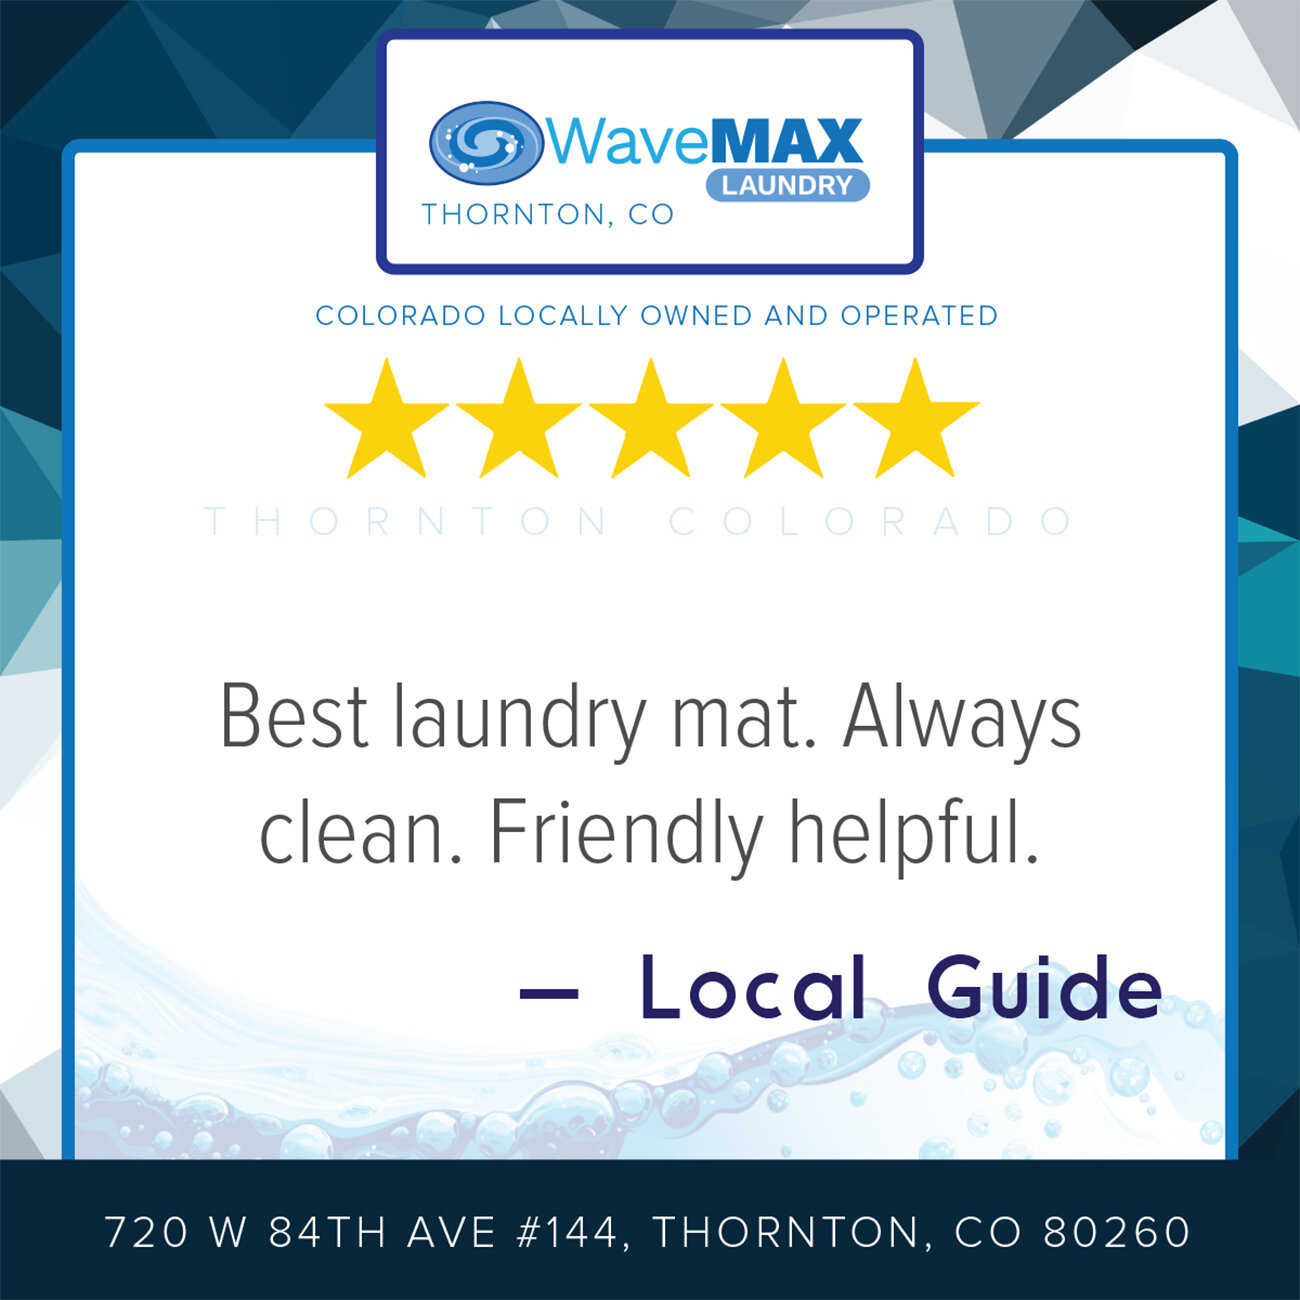 Thank you for noticing for how helpful we try to be here at WaveMAX. Have you had a great experience at WaveMAX Thornton? Please leave us a review or read what others have to say about WaveMAX Thornton &gt;&gt;http://bit.ly/WaveMAXThornton